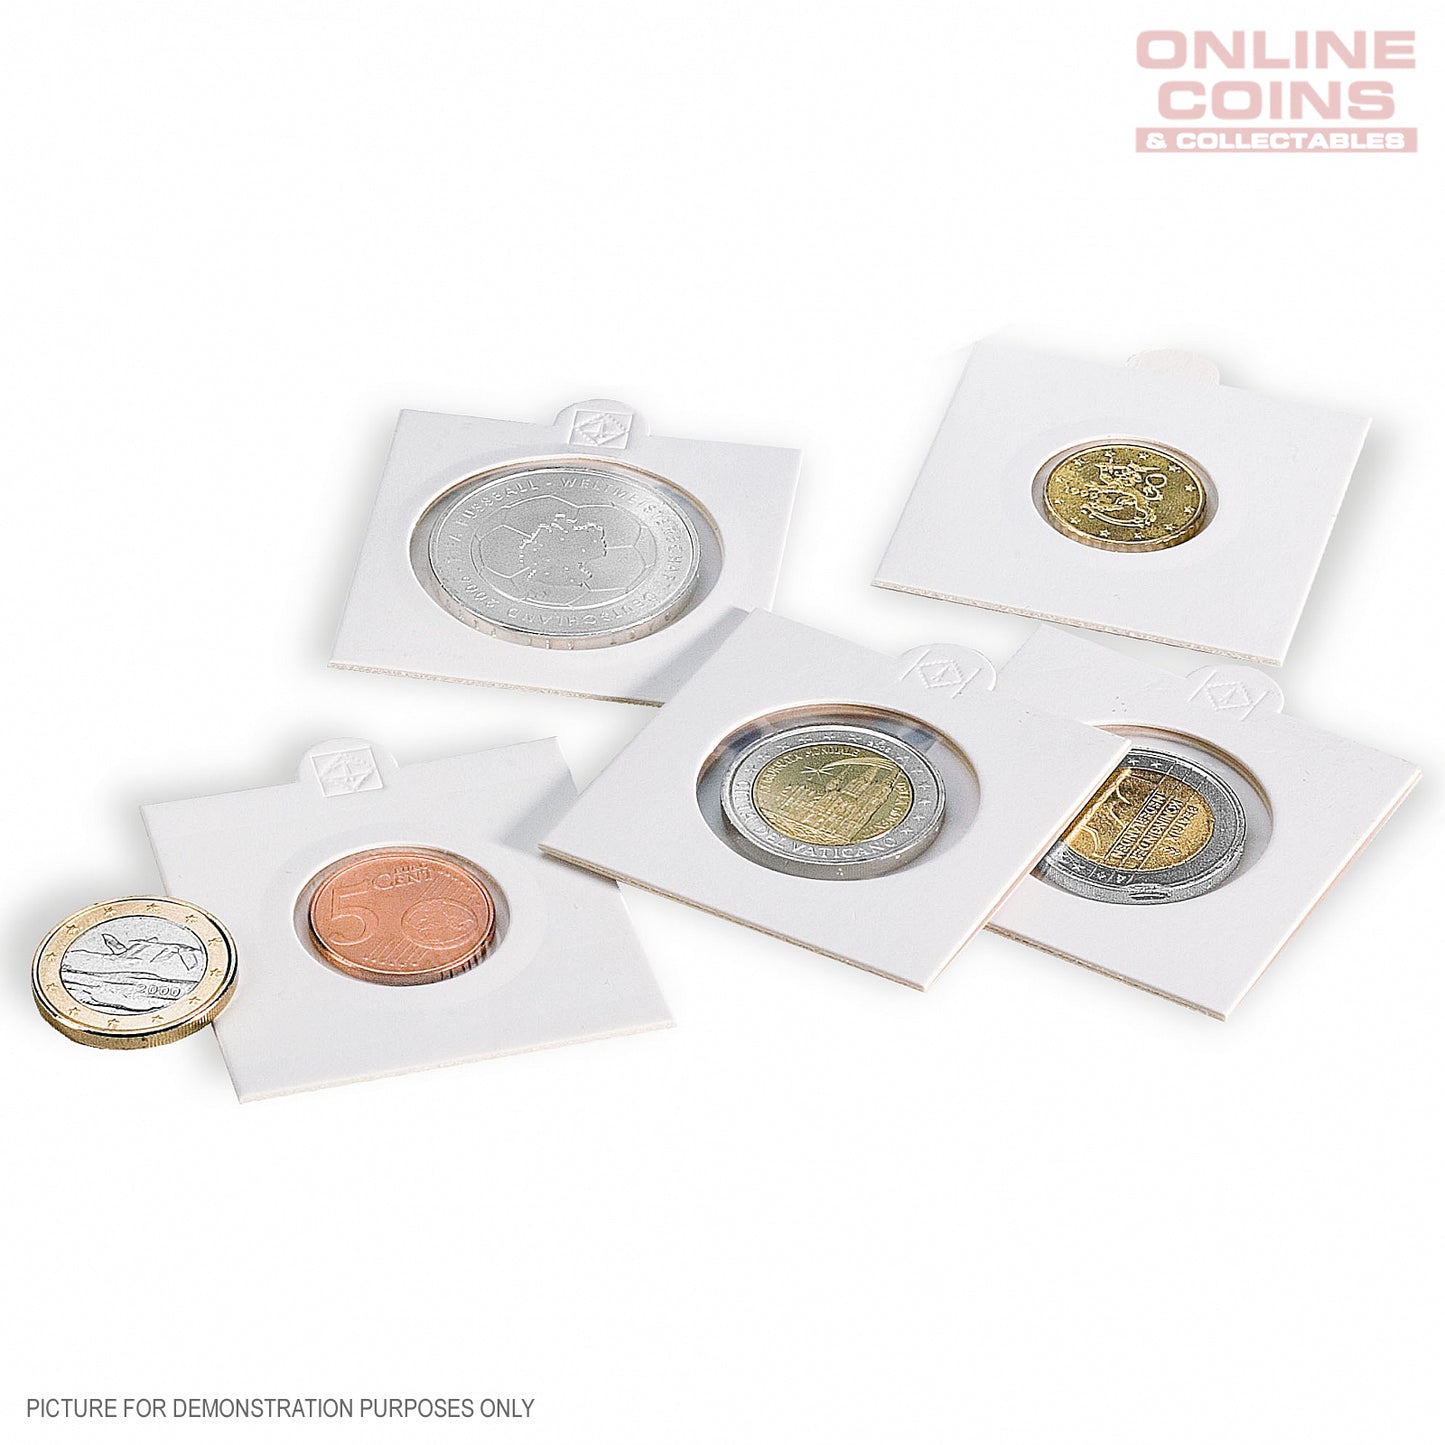 Lighthouse MATRIX WHITE 17.5mm Self Adhesive 2"x2" Coin Holders x 25 - Protection for your Coins (Suitable For Australian Threepence Coins)